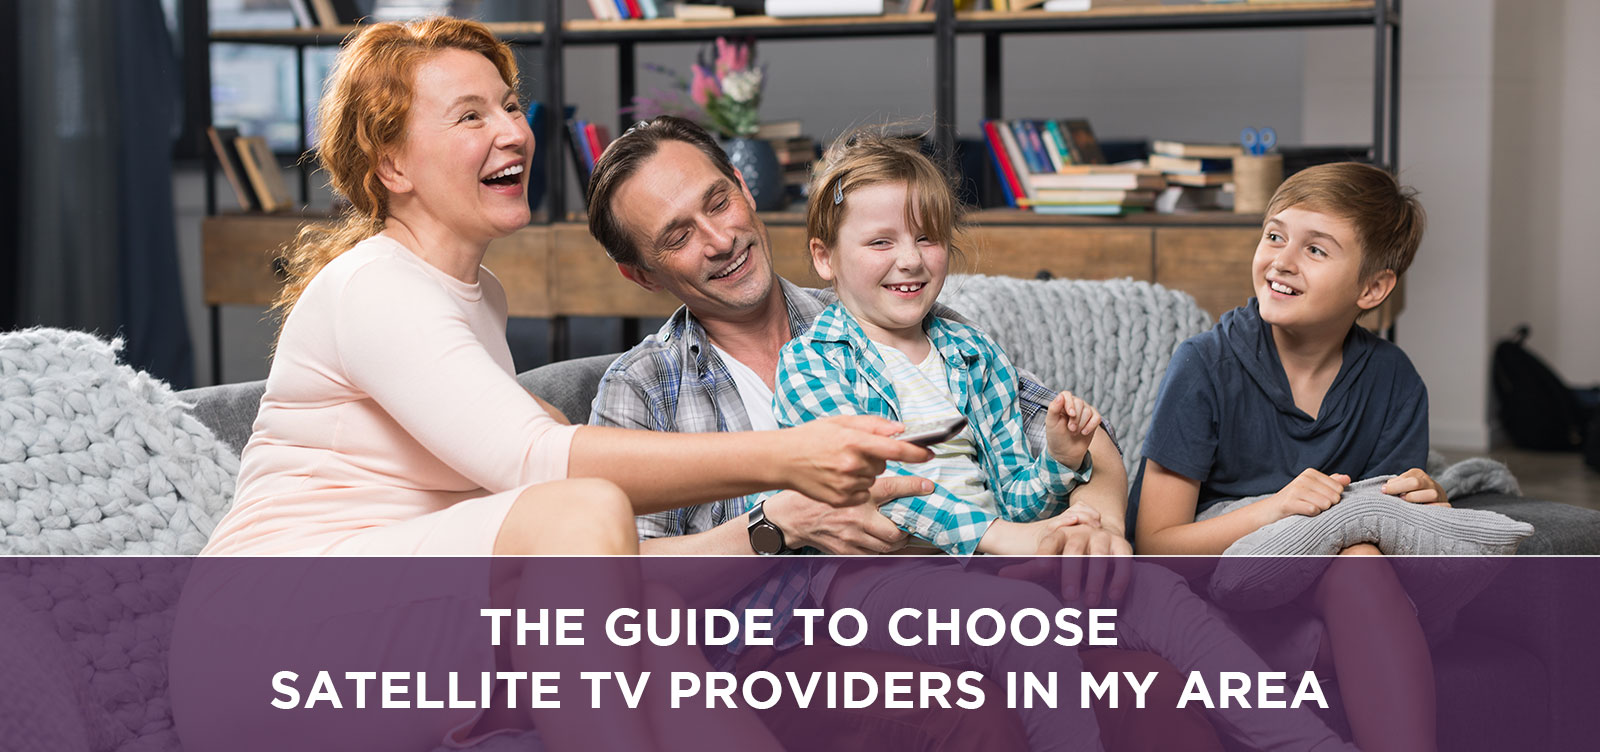 The Guide to choose satellite tv providers in my area